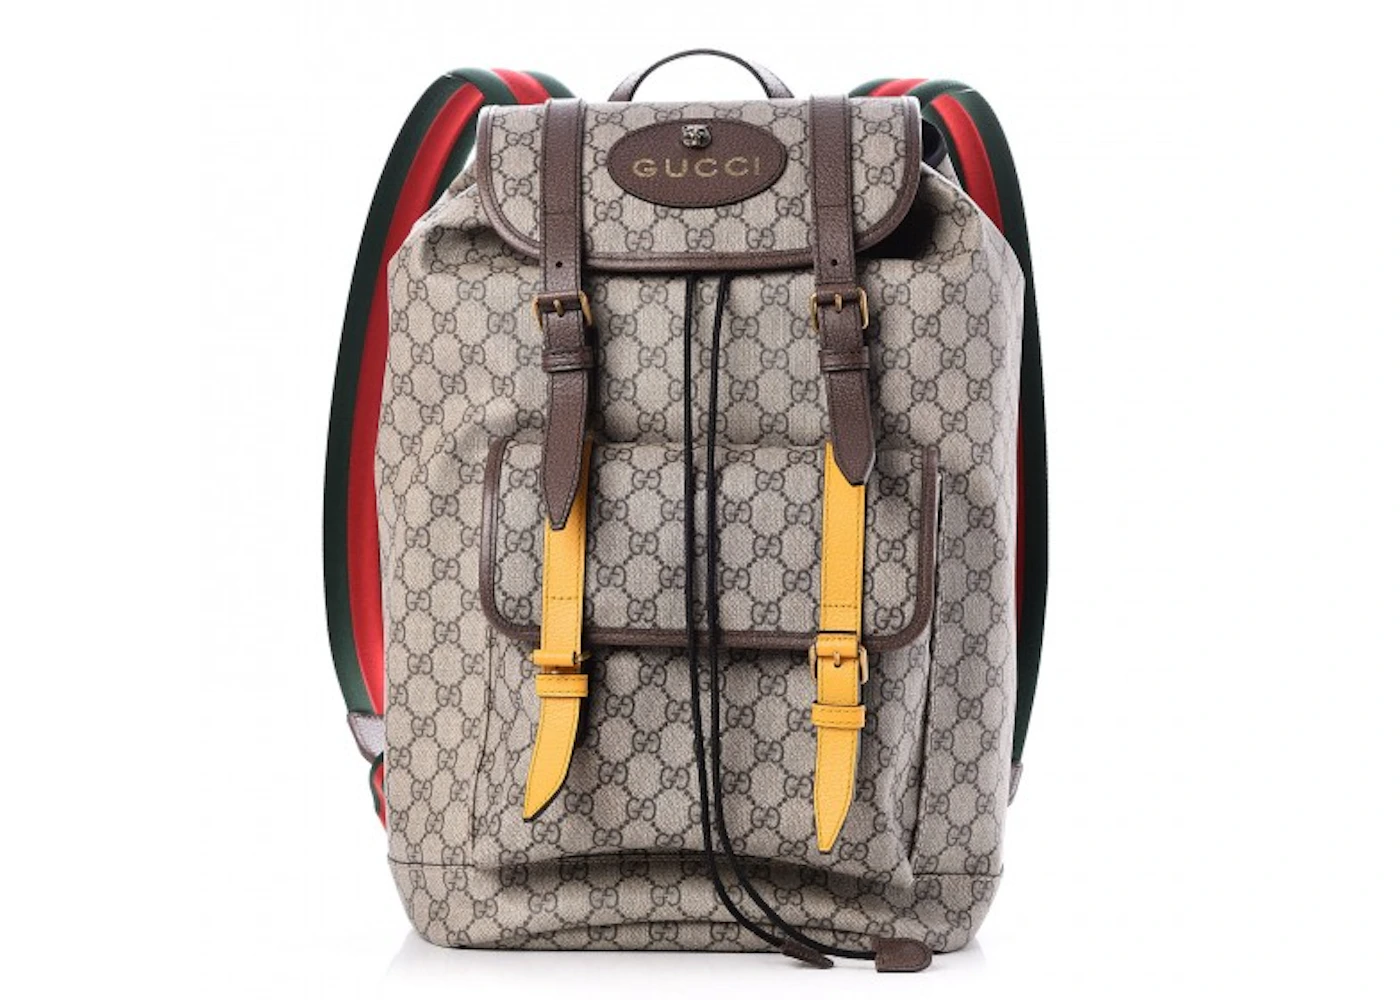 Gucci Soft Backpack GG Supreme Web Straps Brown Yellow